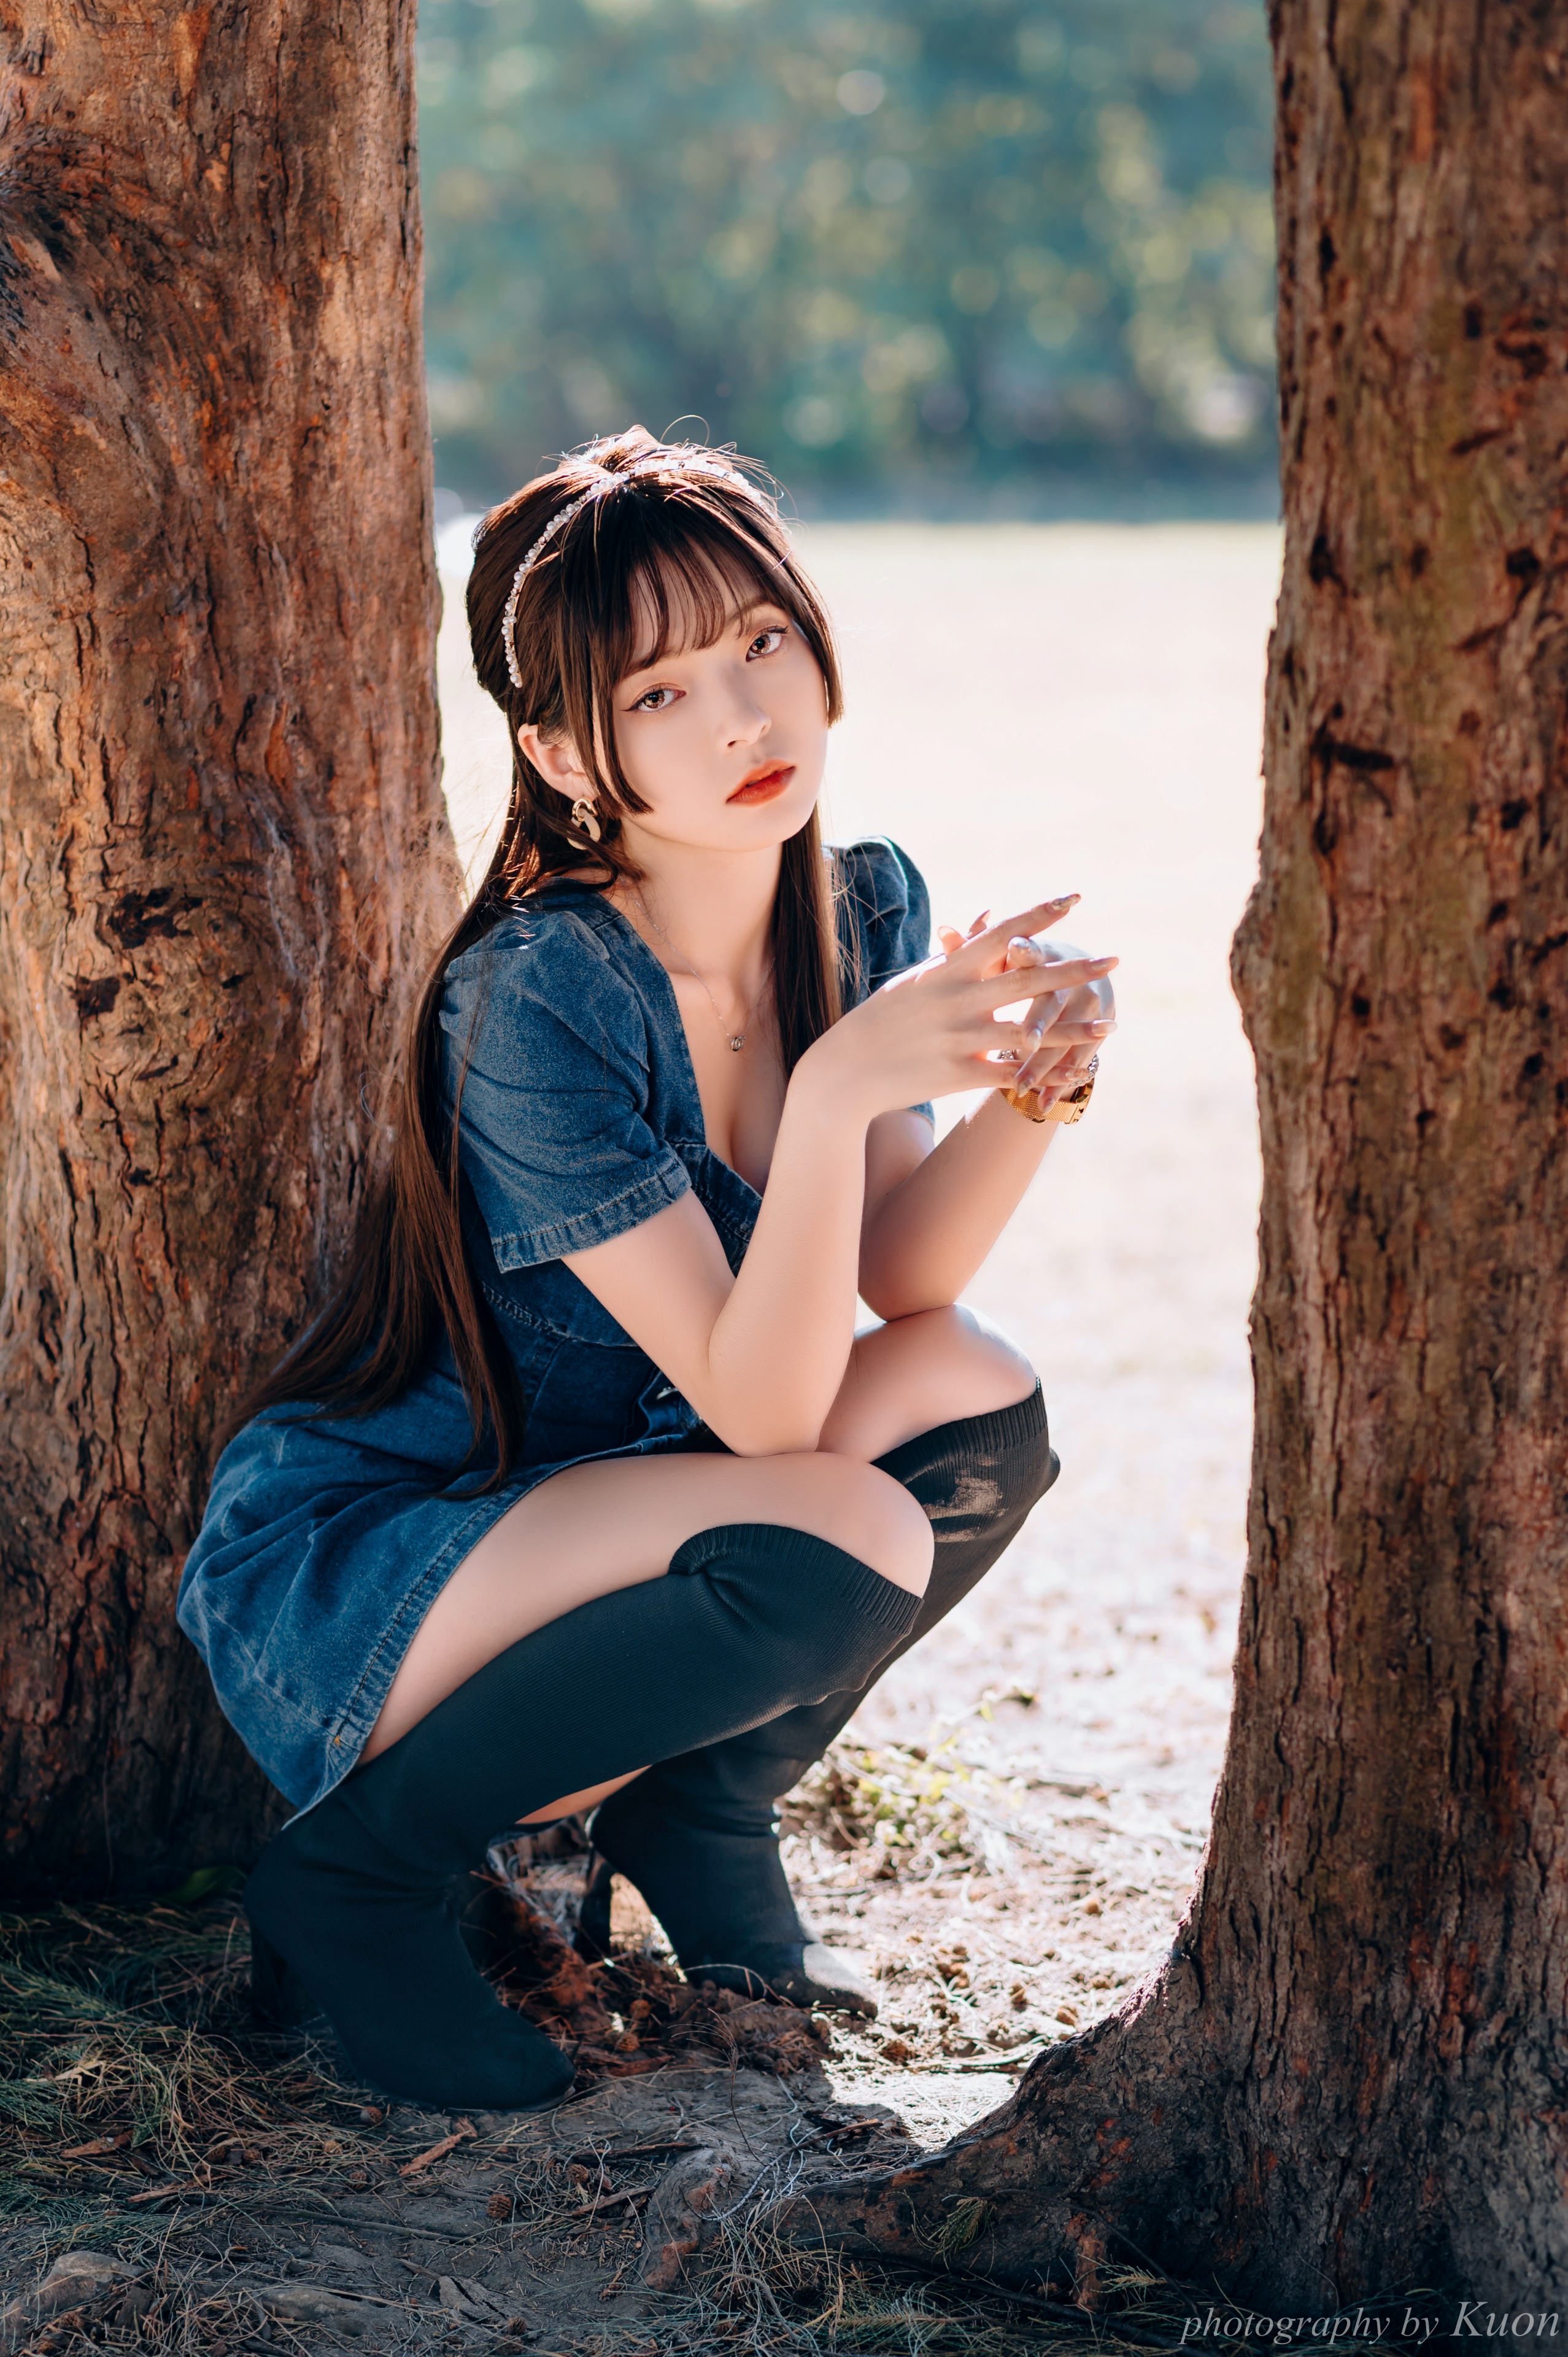 People 2555x3840 Asian women model brunette bangs long hair looking at viewer parted lips portrait display necklace dress denim boots depth of field trees cleavage outdoors women outdoors Chinese knee-high boots Chinese model red lipstick